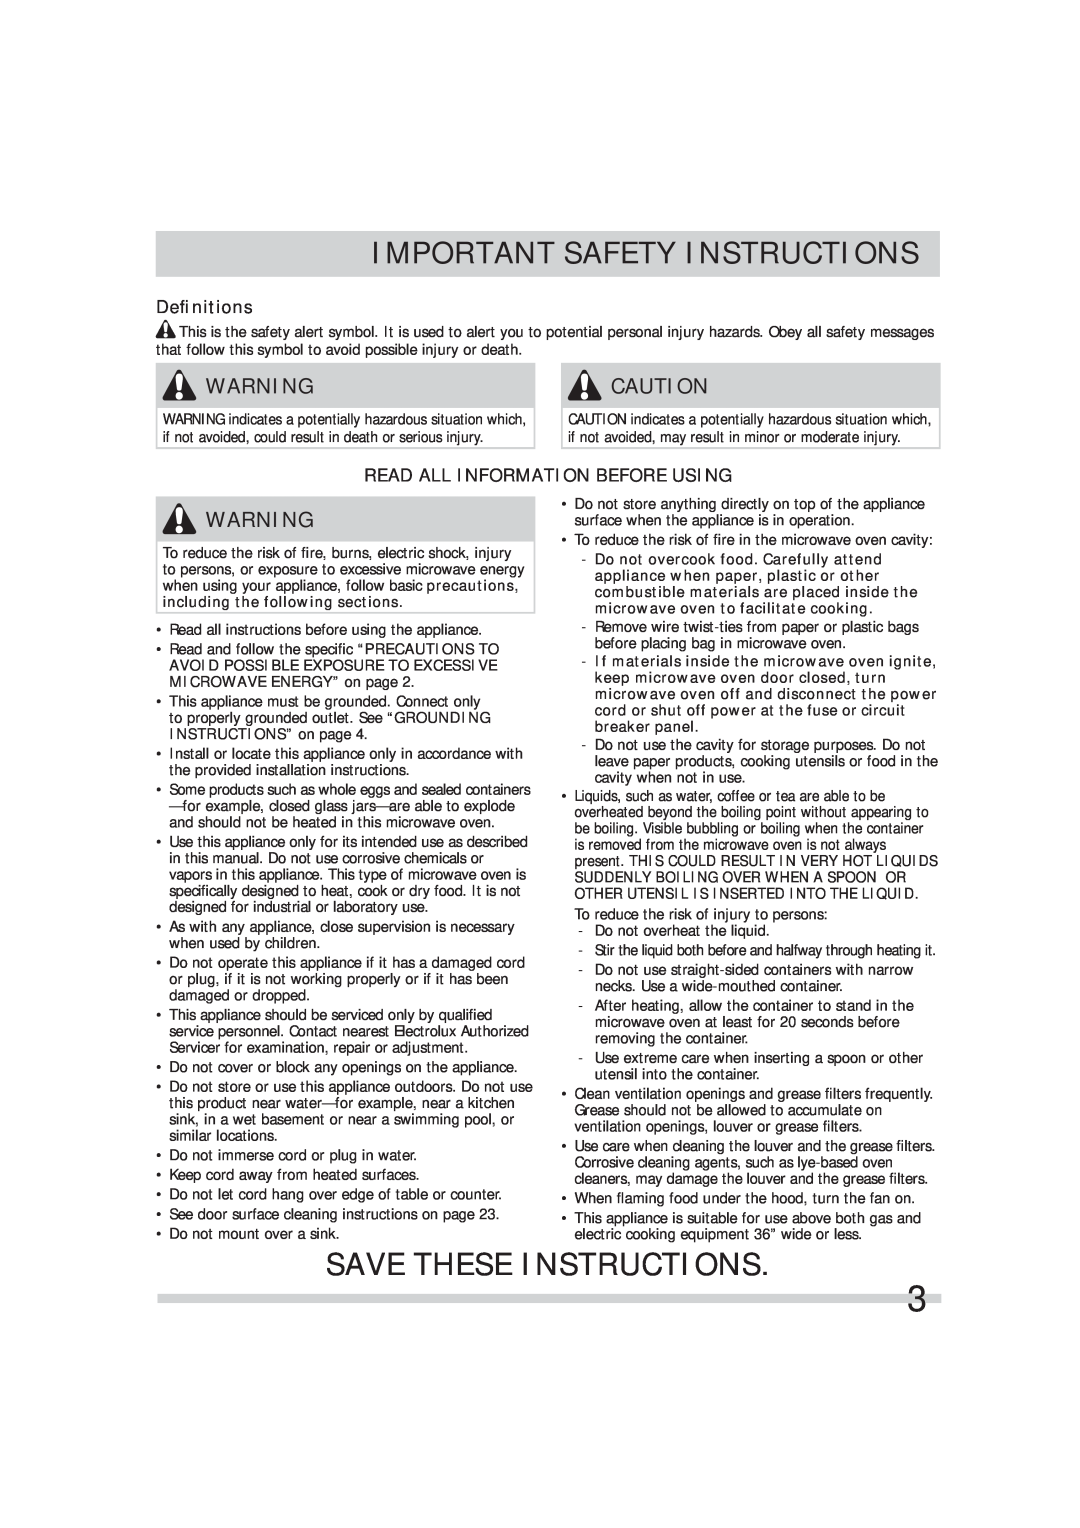 Frigidaire FGMV173KW Important Safety Instructions, Save These Instructions, Deﬁnitions, Read All Information Before Using 